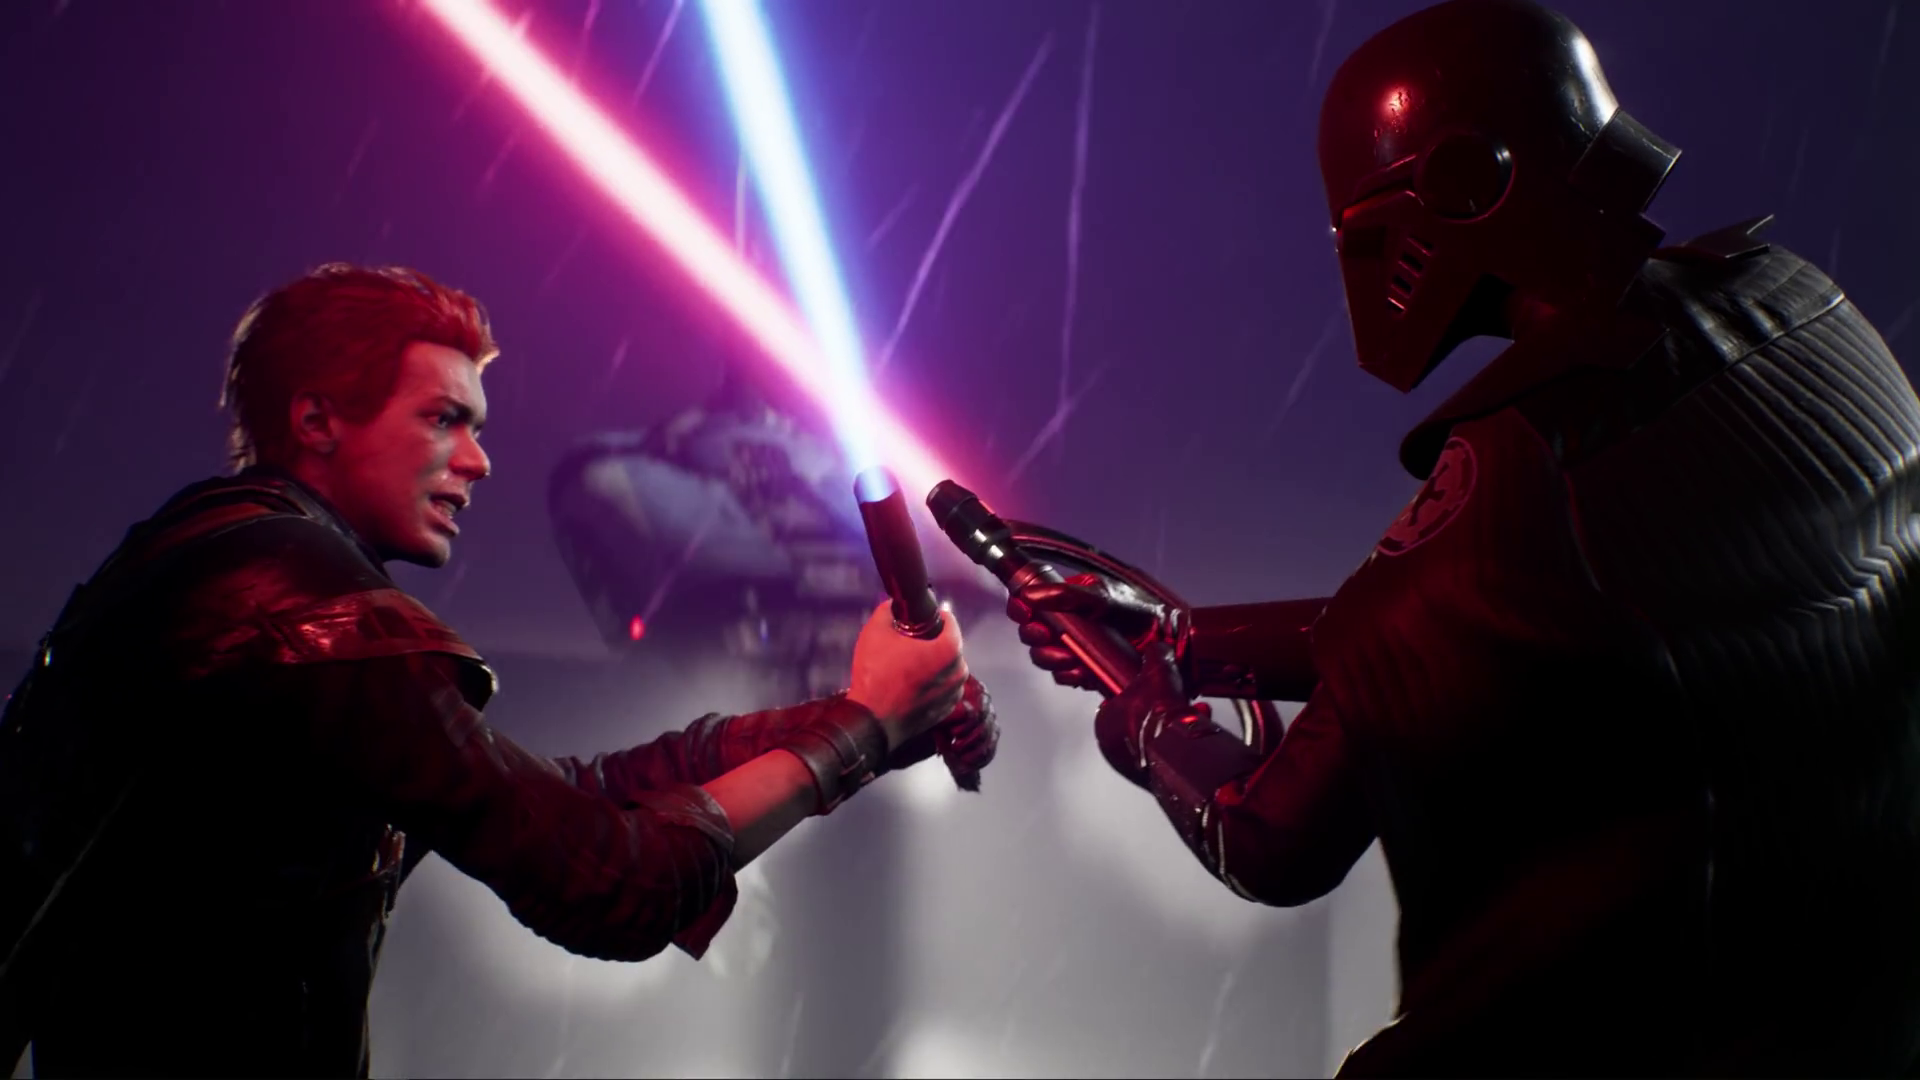 How to download Jedi Fallen Order PS5